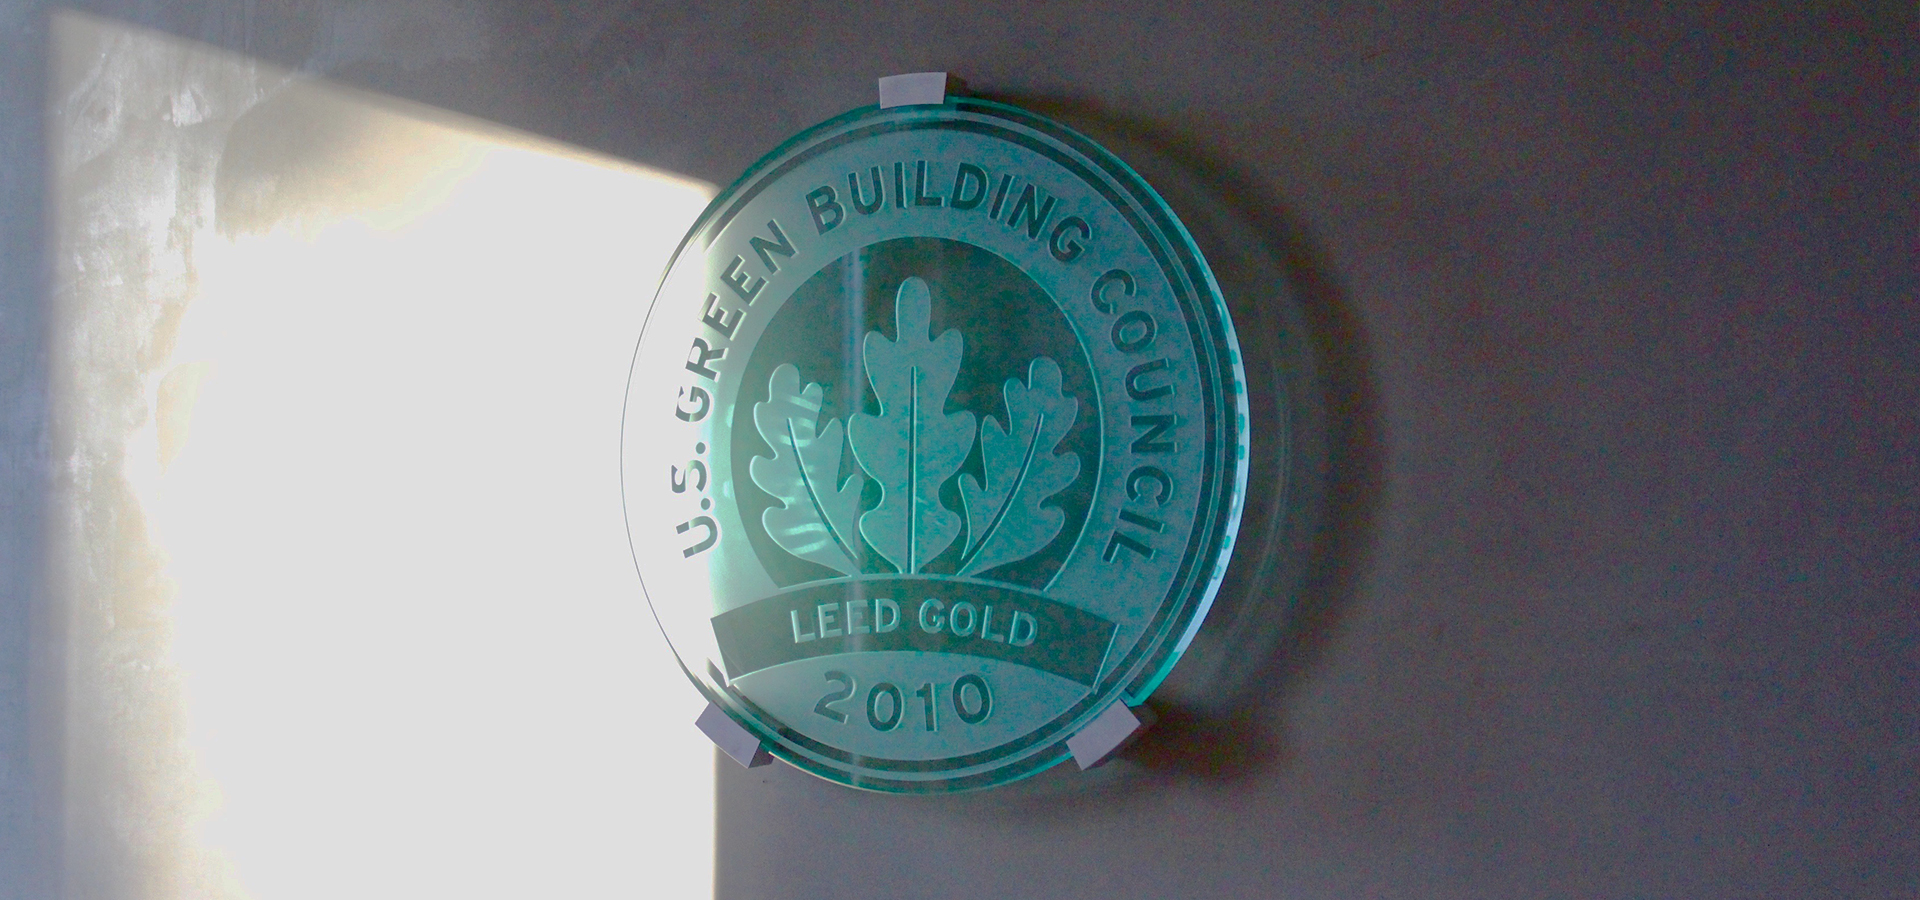 The leeds certification sign at the BPRD office.